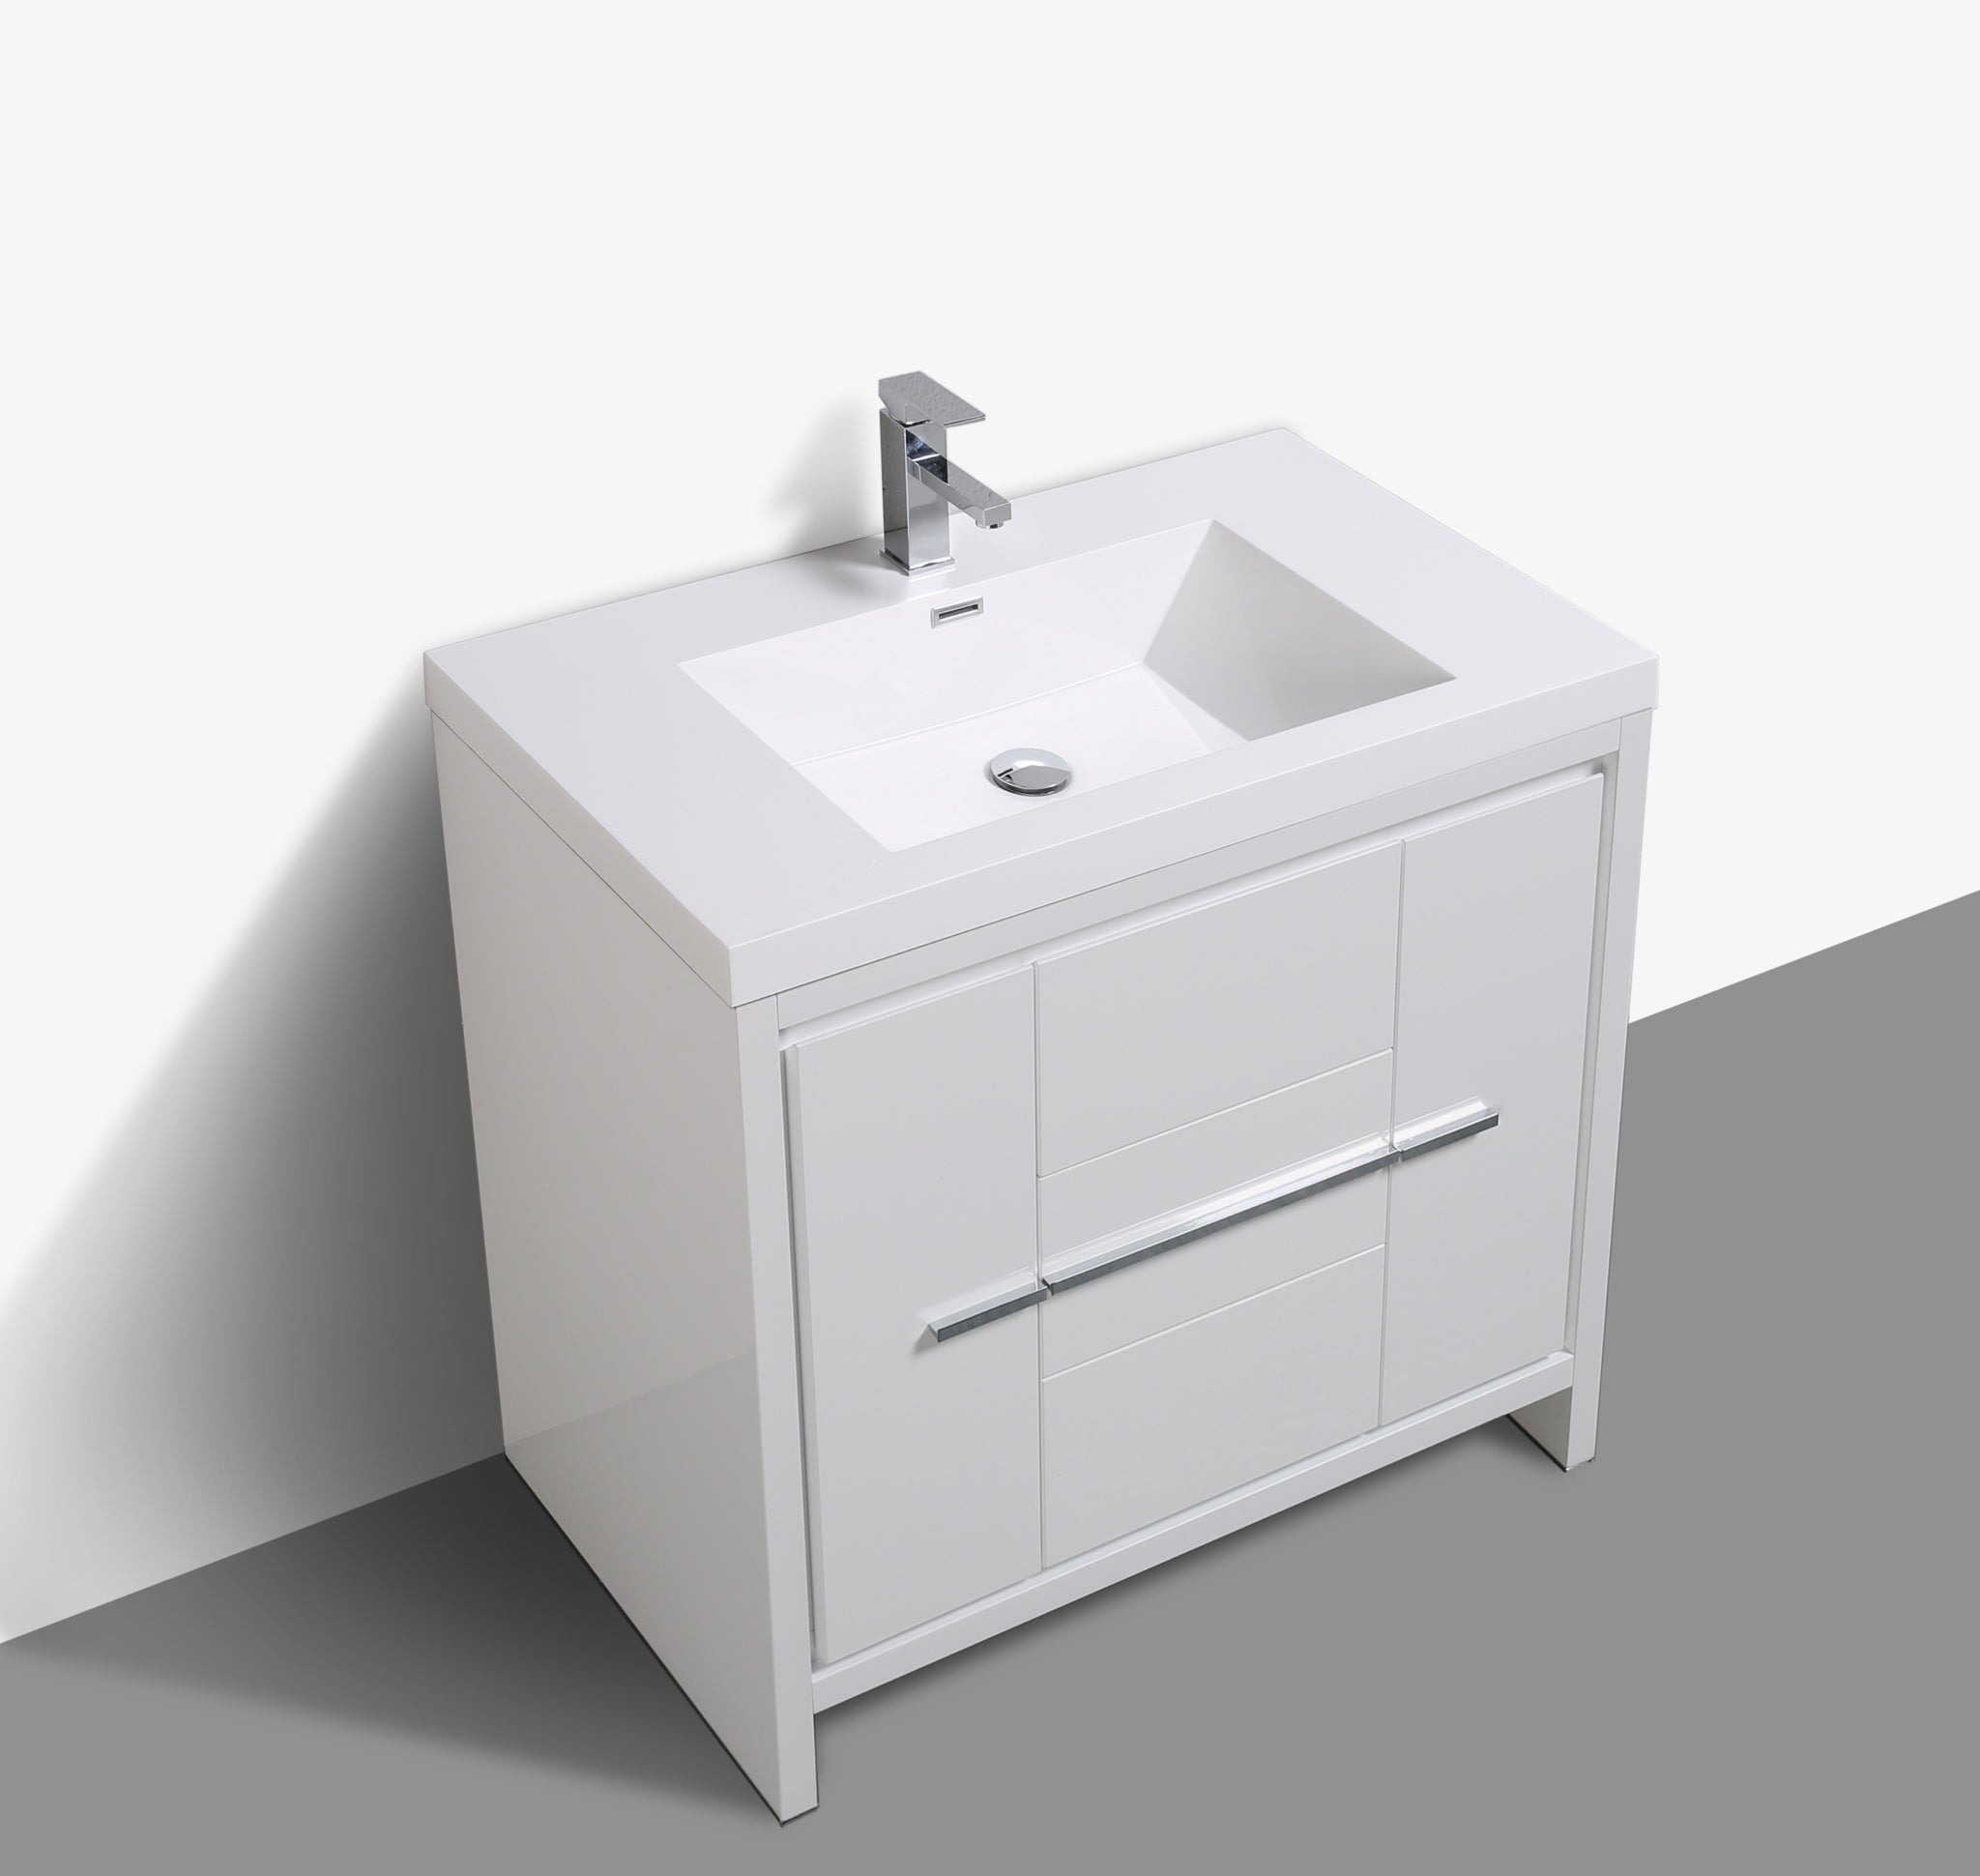 Granada 35.5 White High Gloss With Chrome Handle Cabinet, Square Cultured Marble Sink, Free Standing Modern Vanity Set